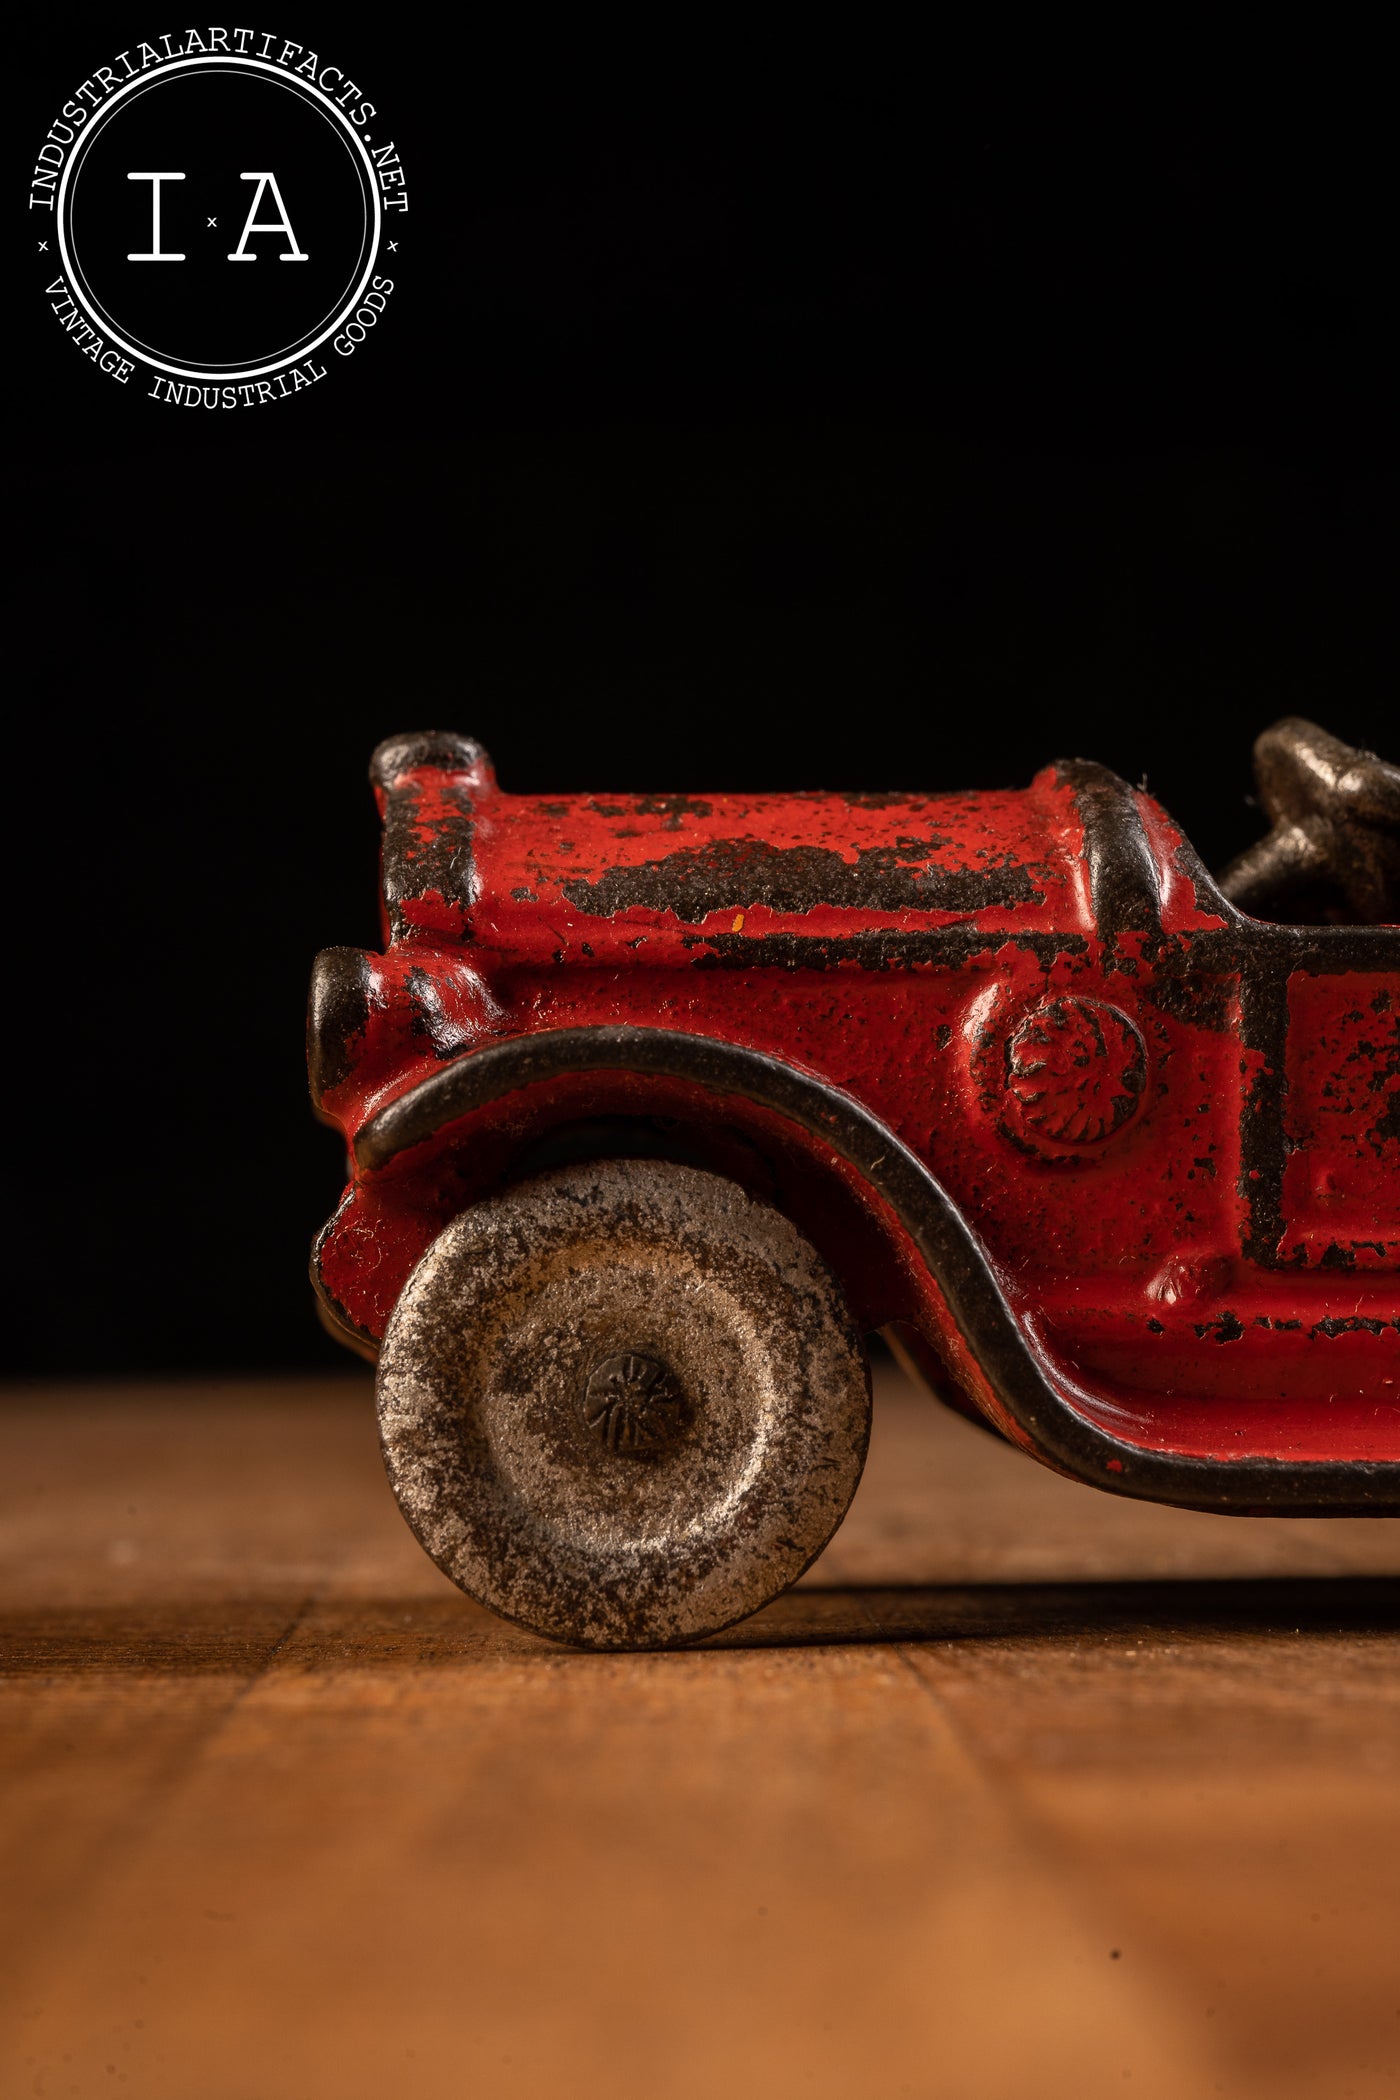 1920s Kilgore Cast Iron Toy Sports Roadster with Original Driver